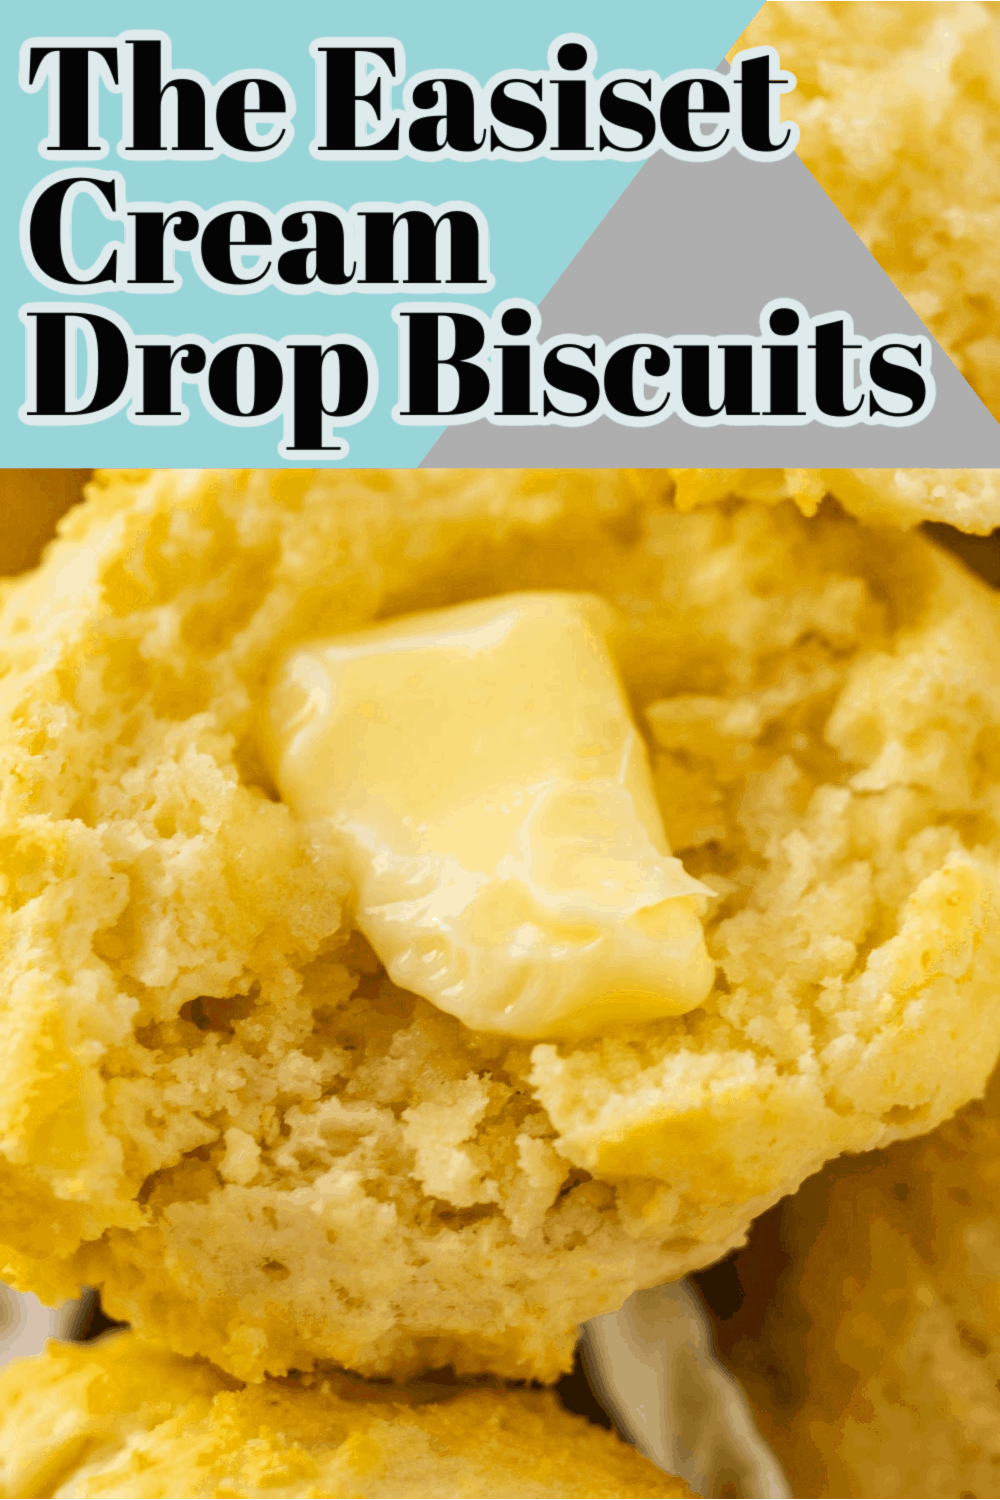 If you can make pancakes, you can make these drop biscuits! They have all the flavor of traditional buttery biscuits without all the work! via @hlikesfood